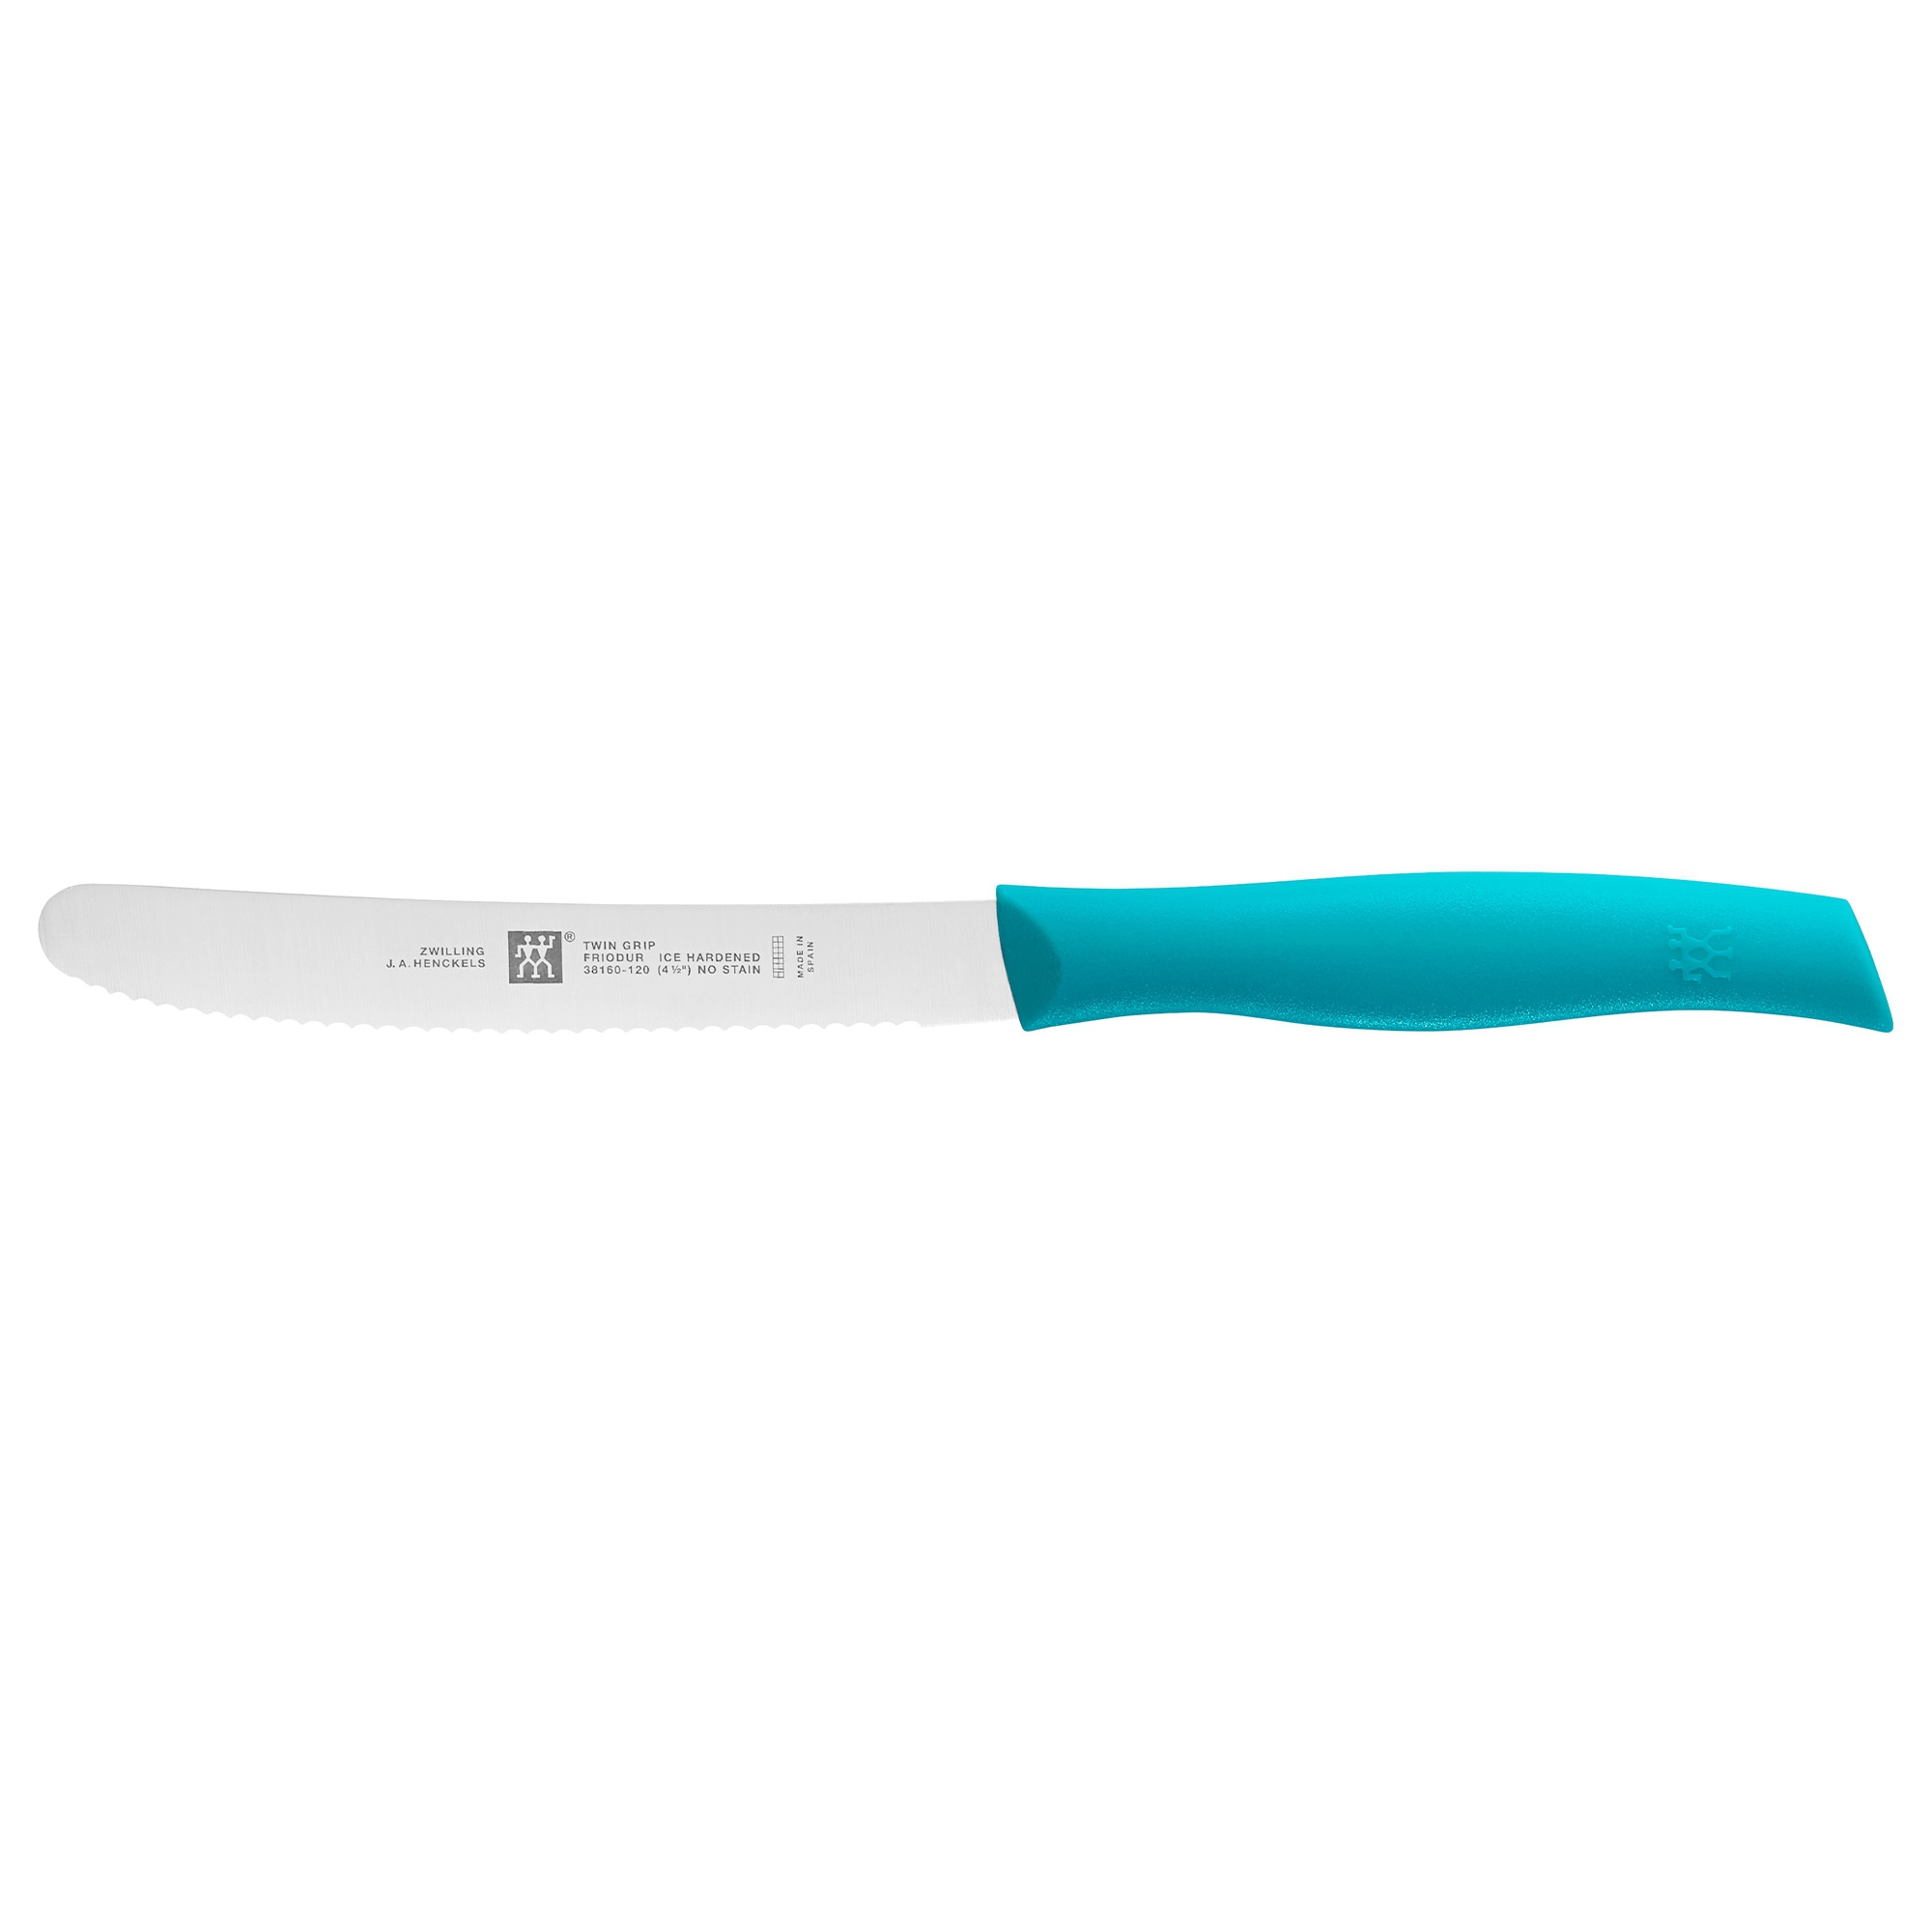 Zwilling - knife set of 2, pink/turquoise